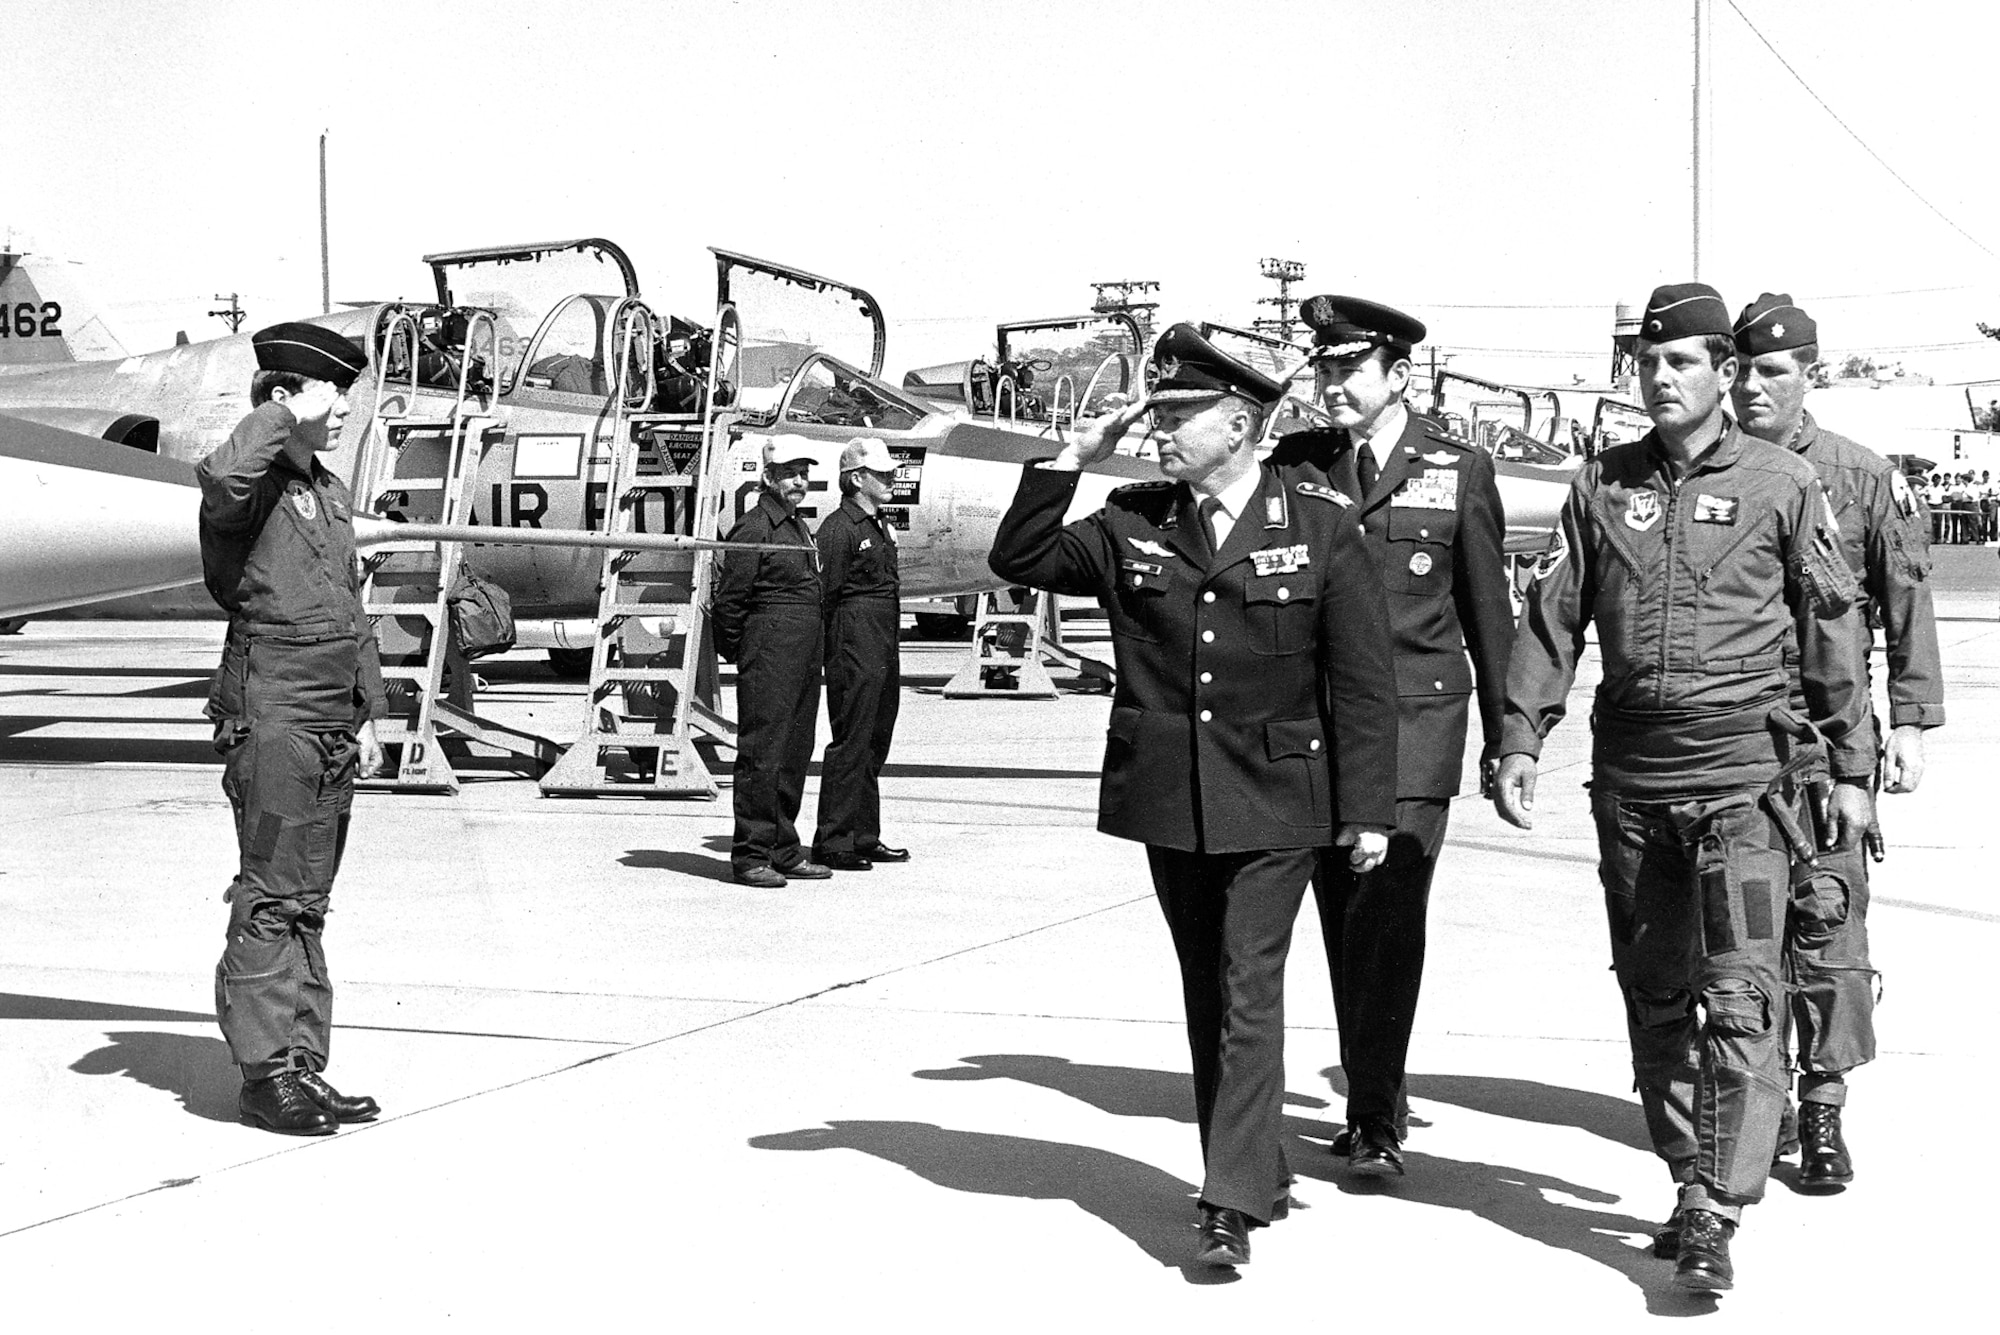 Lt. Gen. Fredrich Obleser, German air force chief of staff, and Gen. Wilbur Creech, Tactical Air Command commander, attended a March 16, 1983, ceremony marking the end of the German air force F-104 training program at Luke. (Courtesy photo)